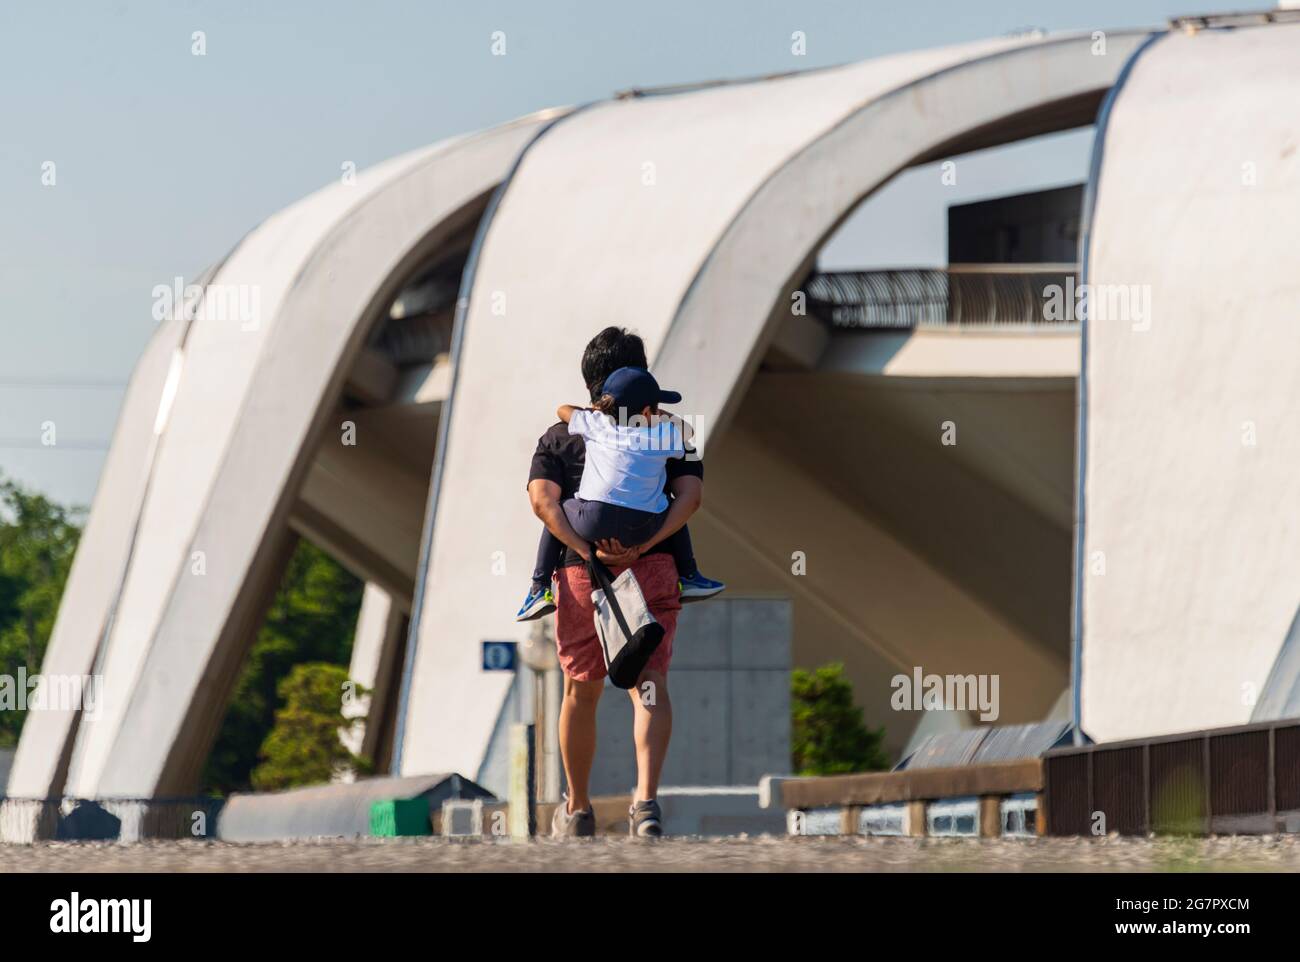 A man carries his son past the Masachika Murata-designed athletics stadium inside Komazawa Olympic Park, Tokyo on 10 June 2021. The park was built for the 1064 Olympics and remains a popular leisure venue. Robert Gilhooly photo Stock Photo